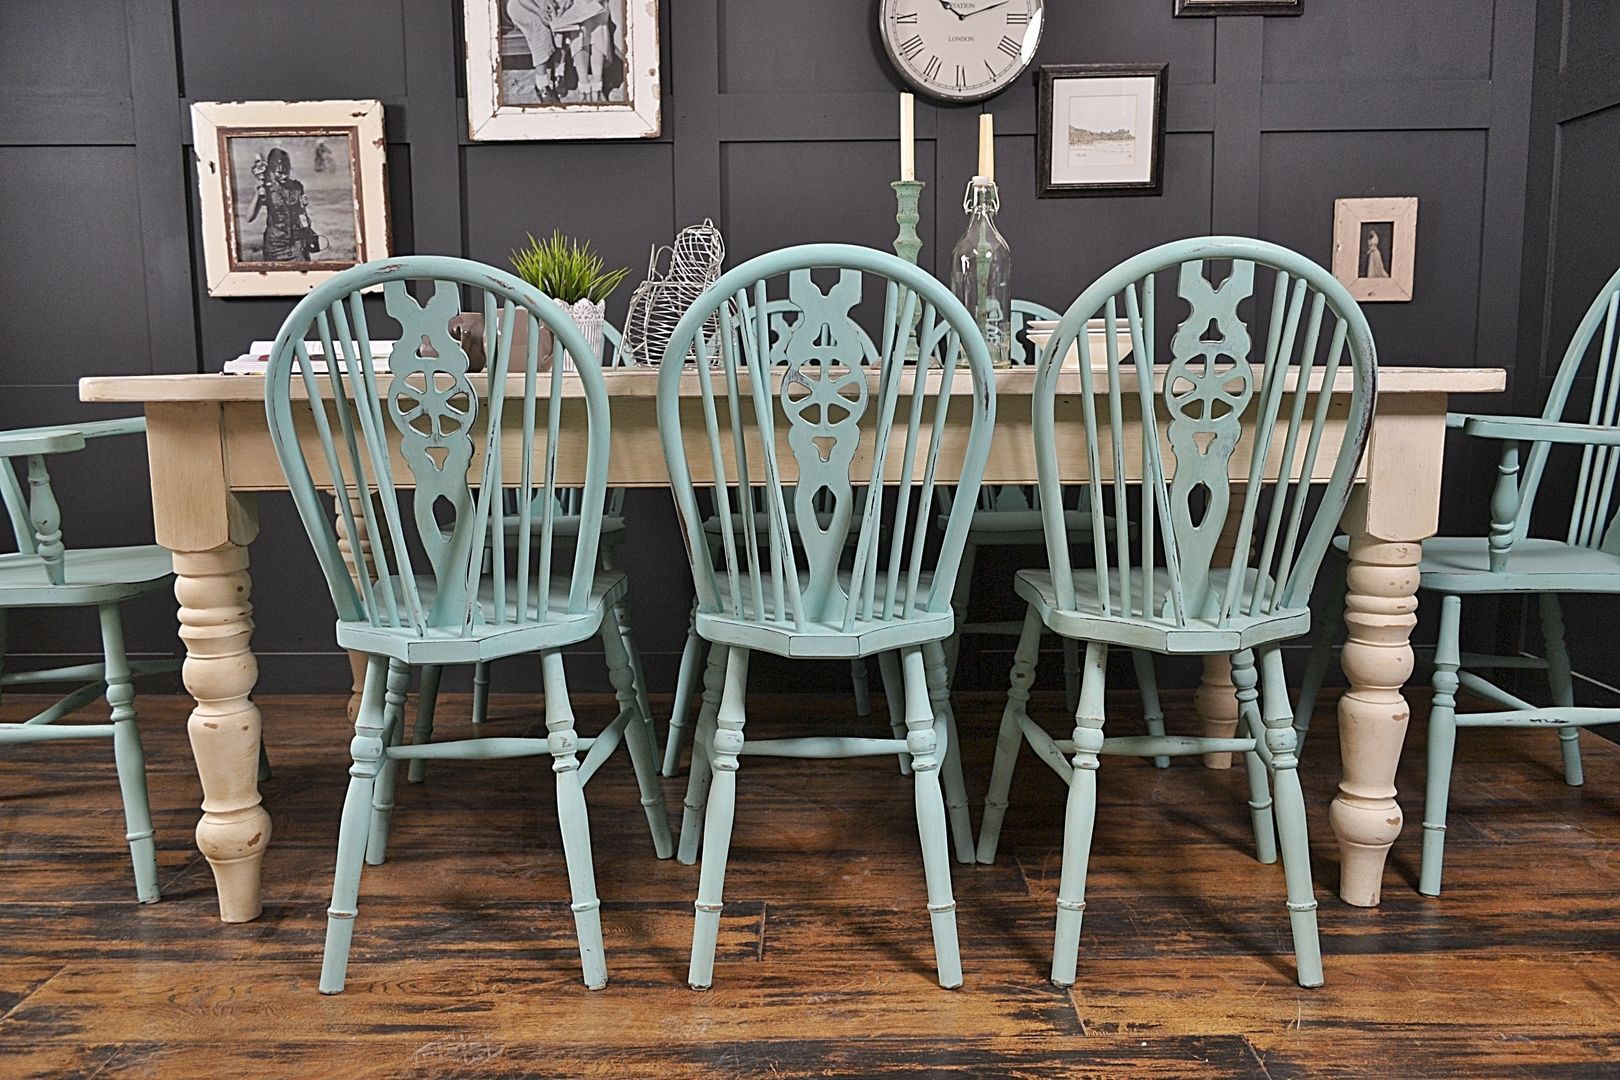 Large Double Drawer, Shabby Chic 8 Seater Farmhouse Dining Set, The Treasure Trove Shabby Chic & Vintage Furniture The Treasure Trove Shabby Chic & Vintage Furniture Country style kitchen Tables & chairs